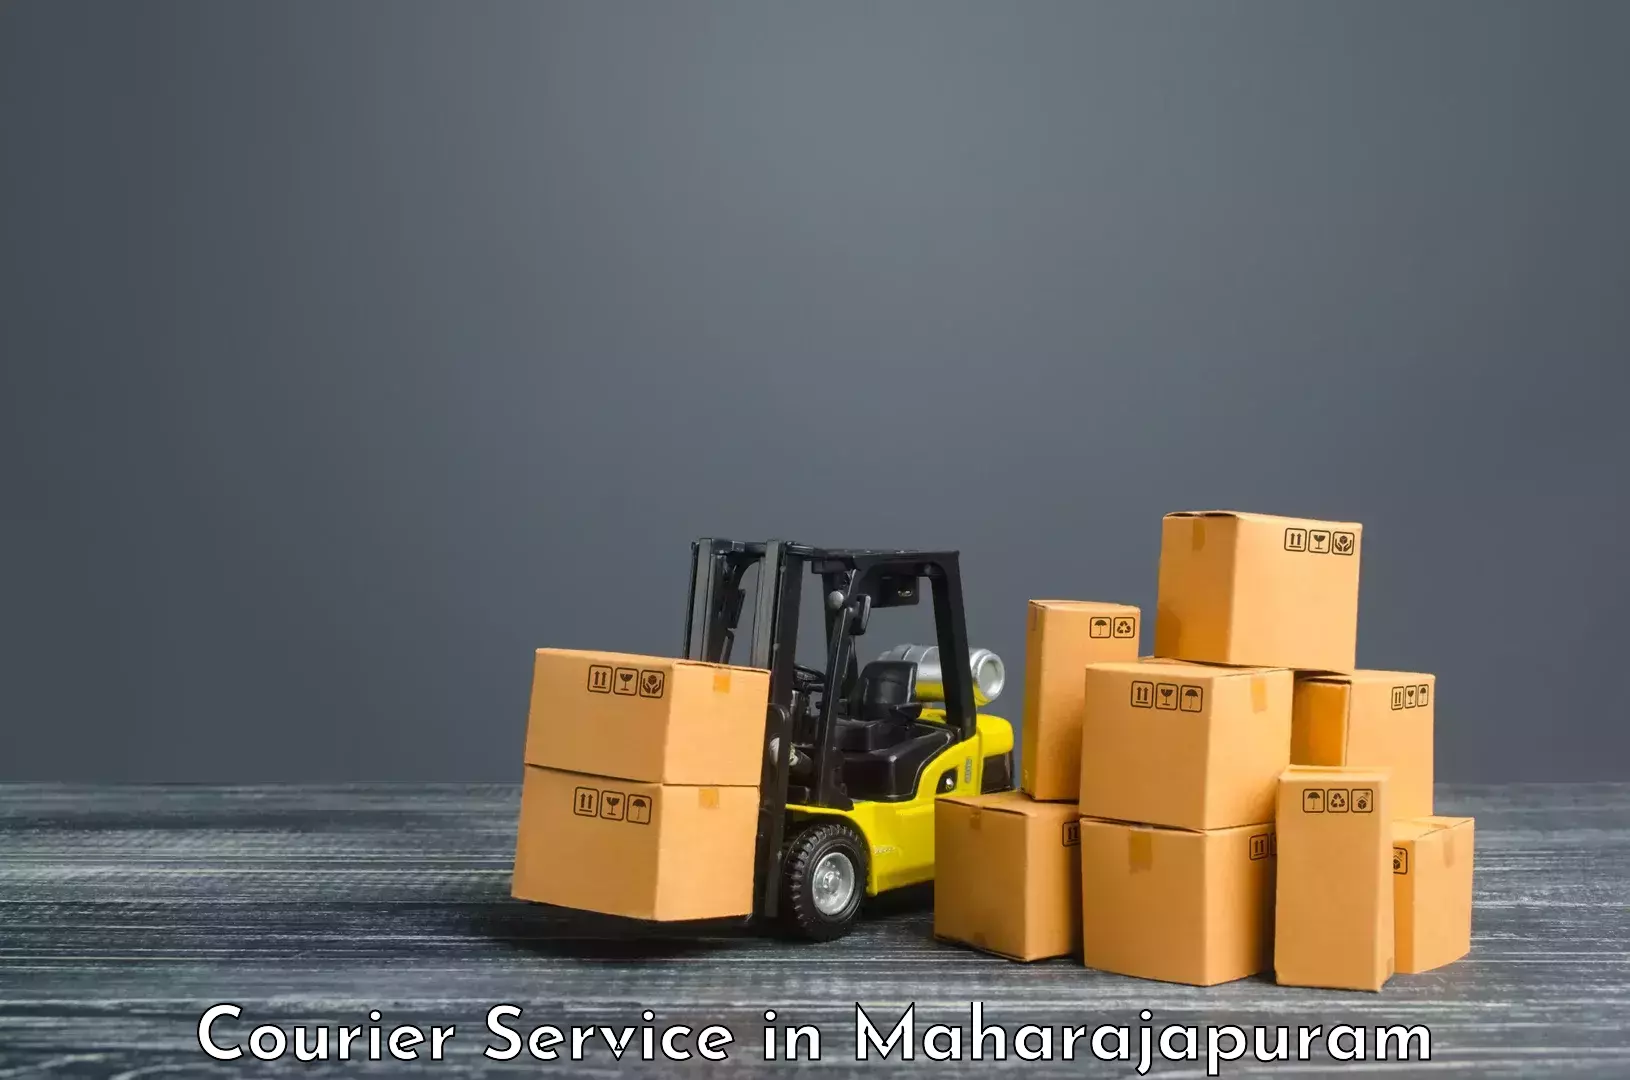 Tailored delivery services in Maharajapuram